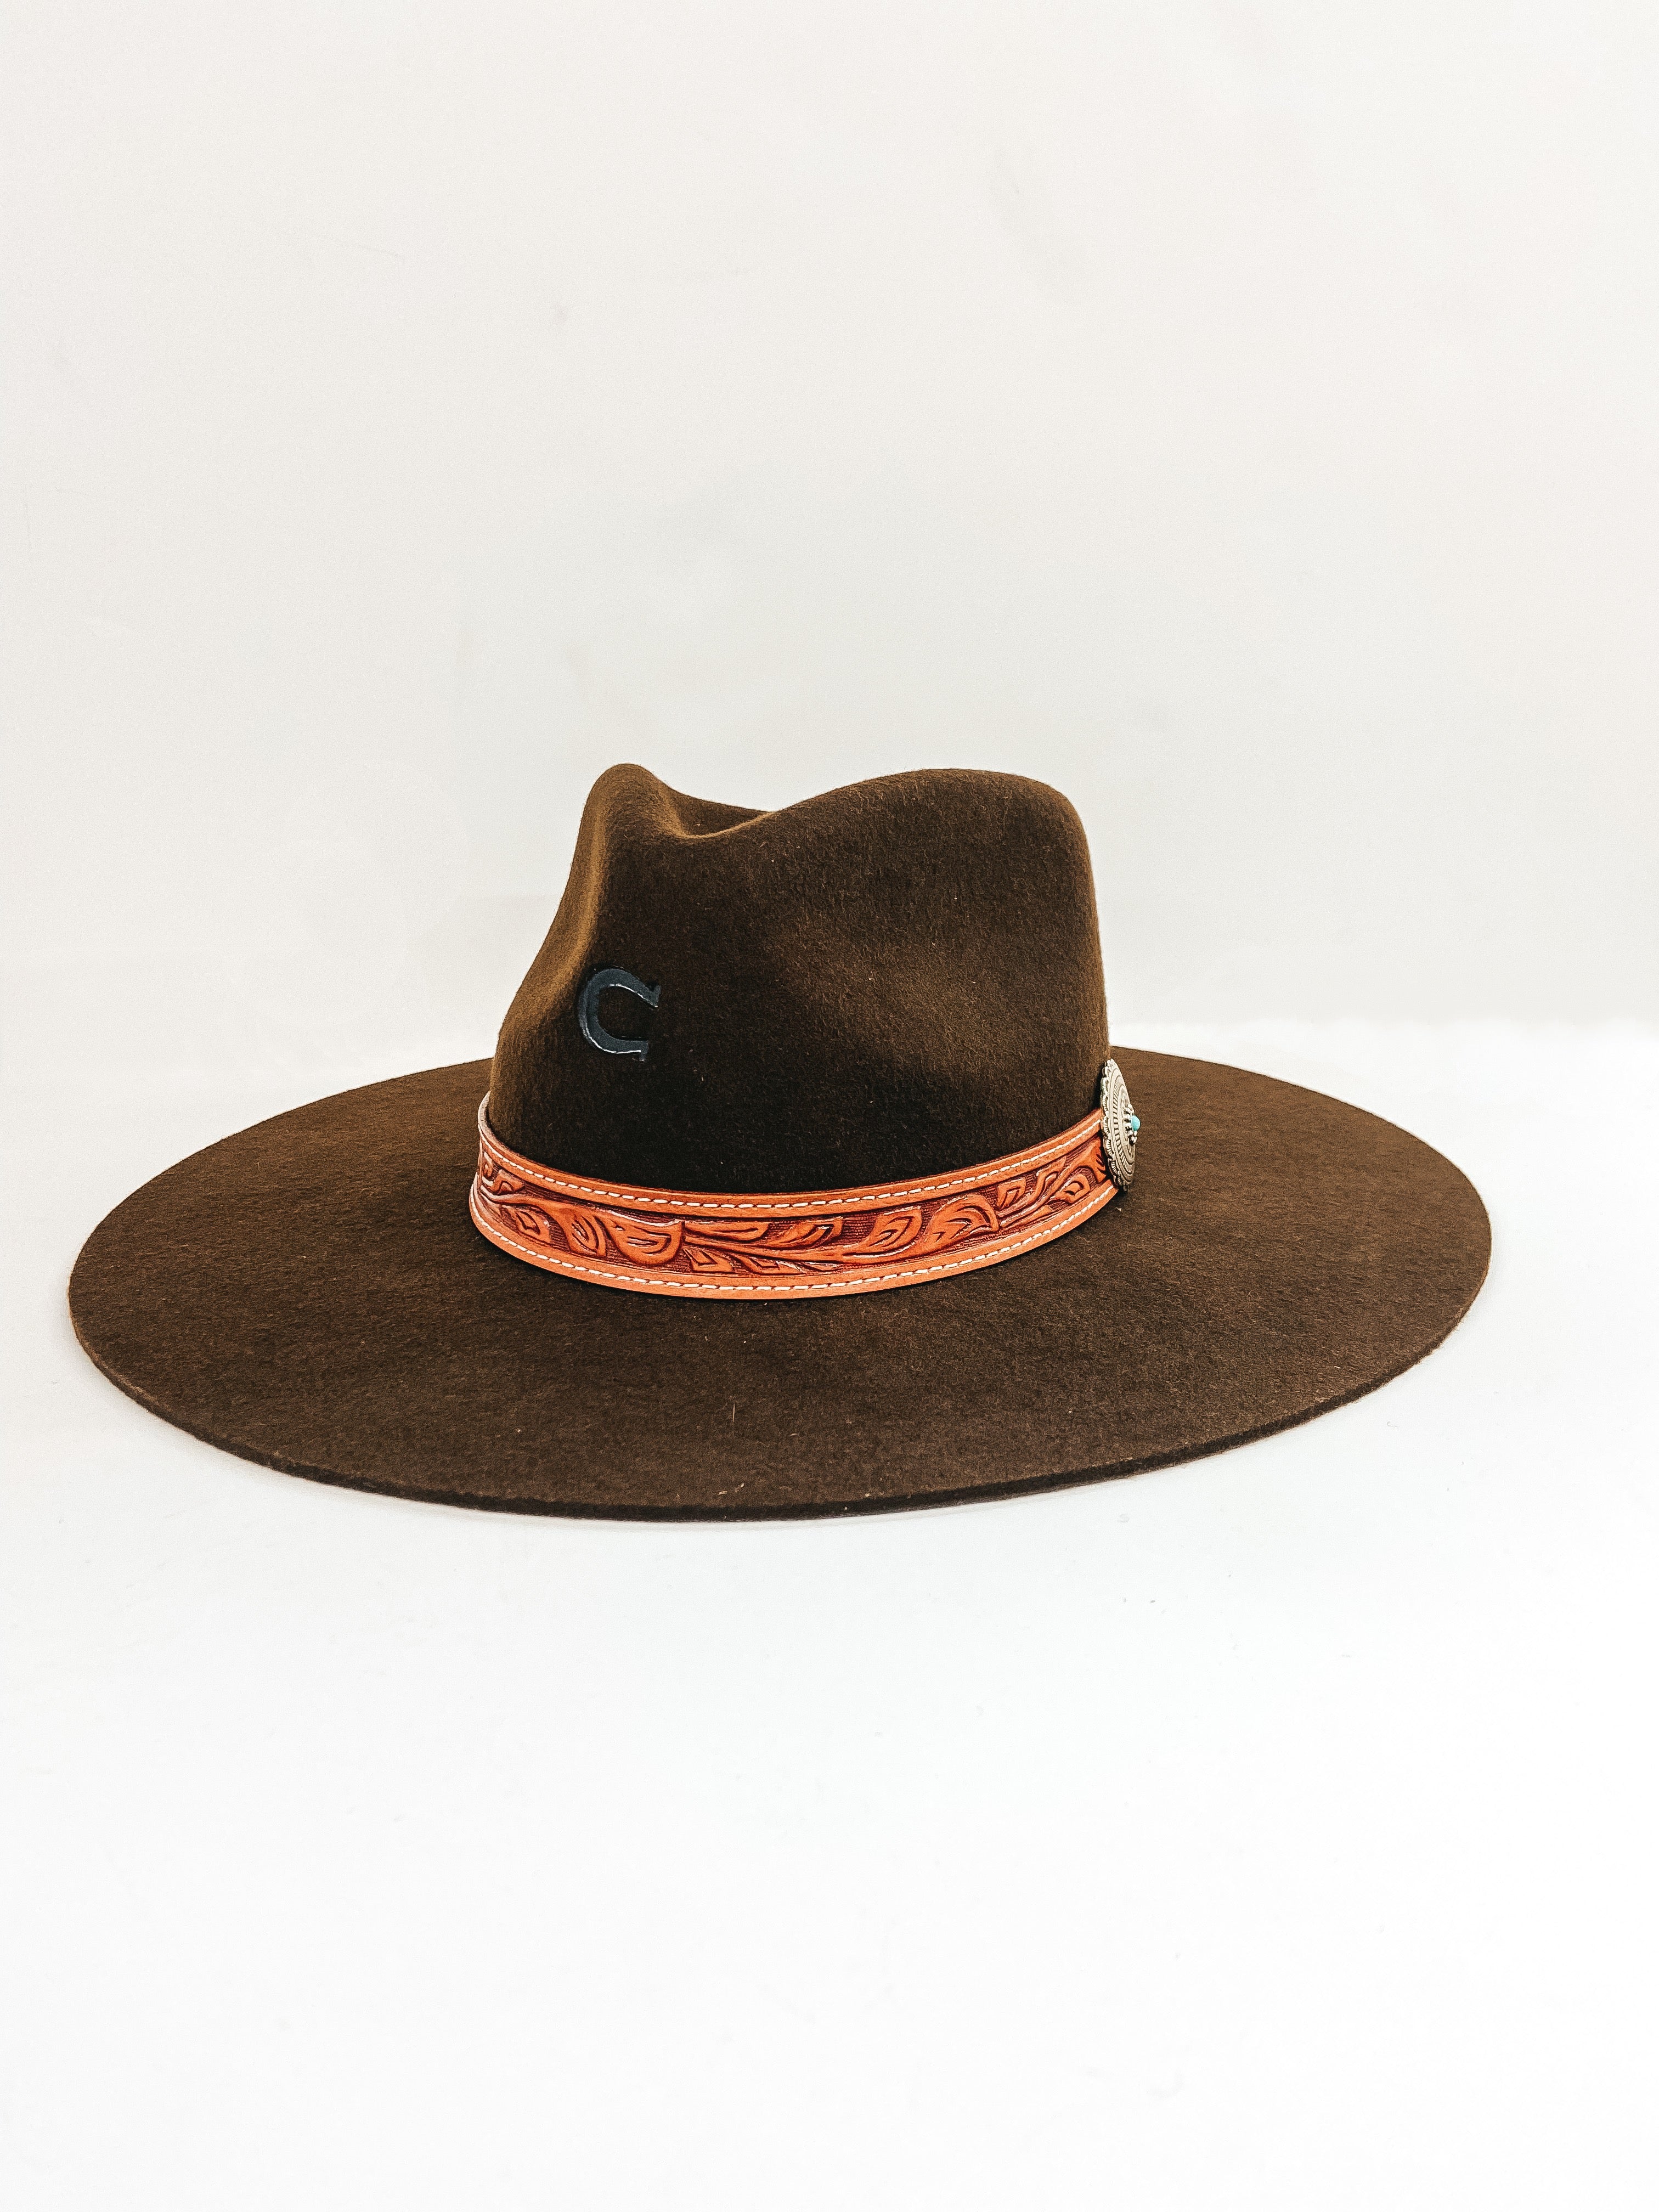 Charlie 1 Horse | White Sands Wool Felt Hat with Leather Tooled Band and Silver Concho in Chocolate Brown - Giddy Up Glamour Boutique